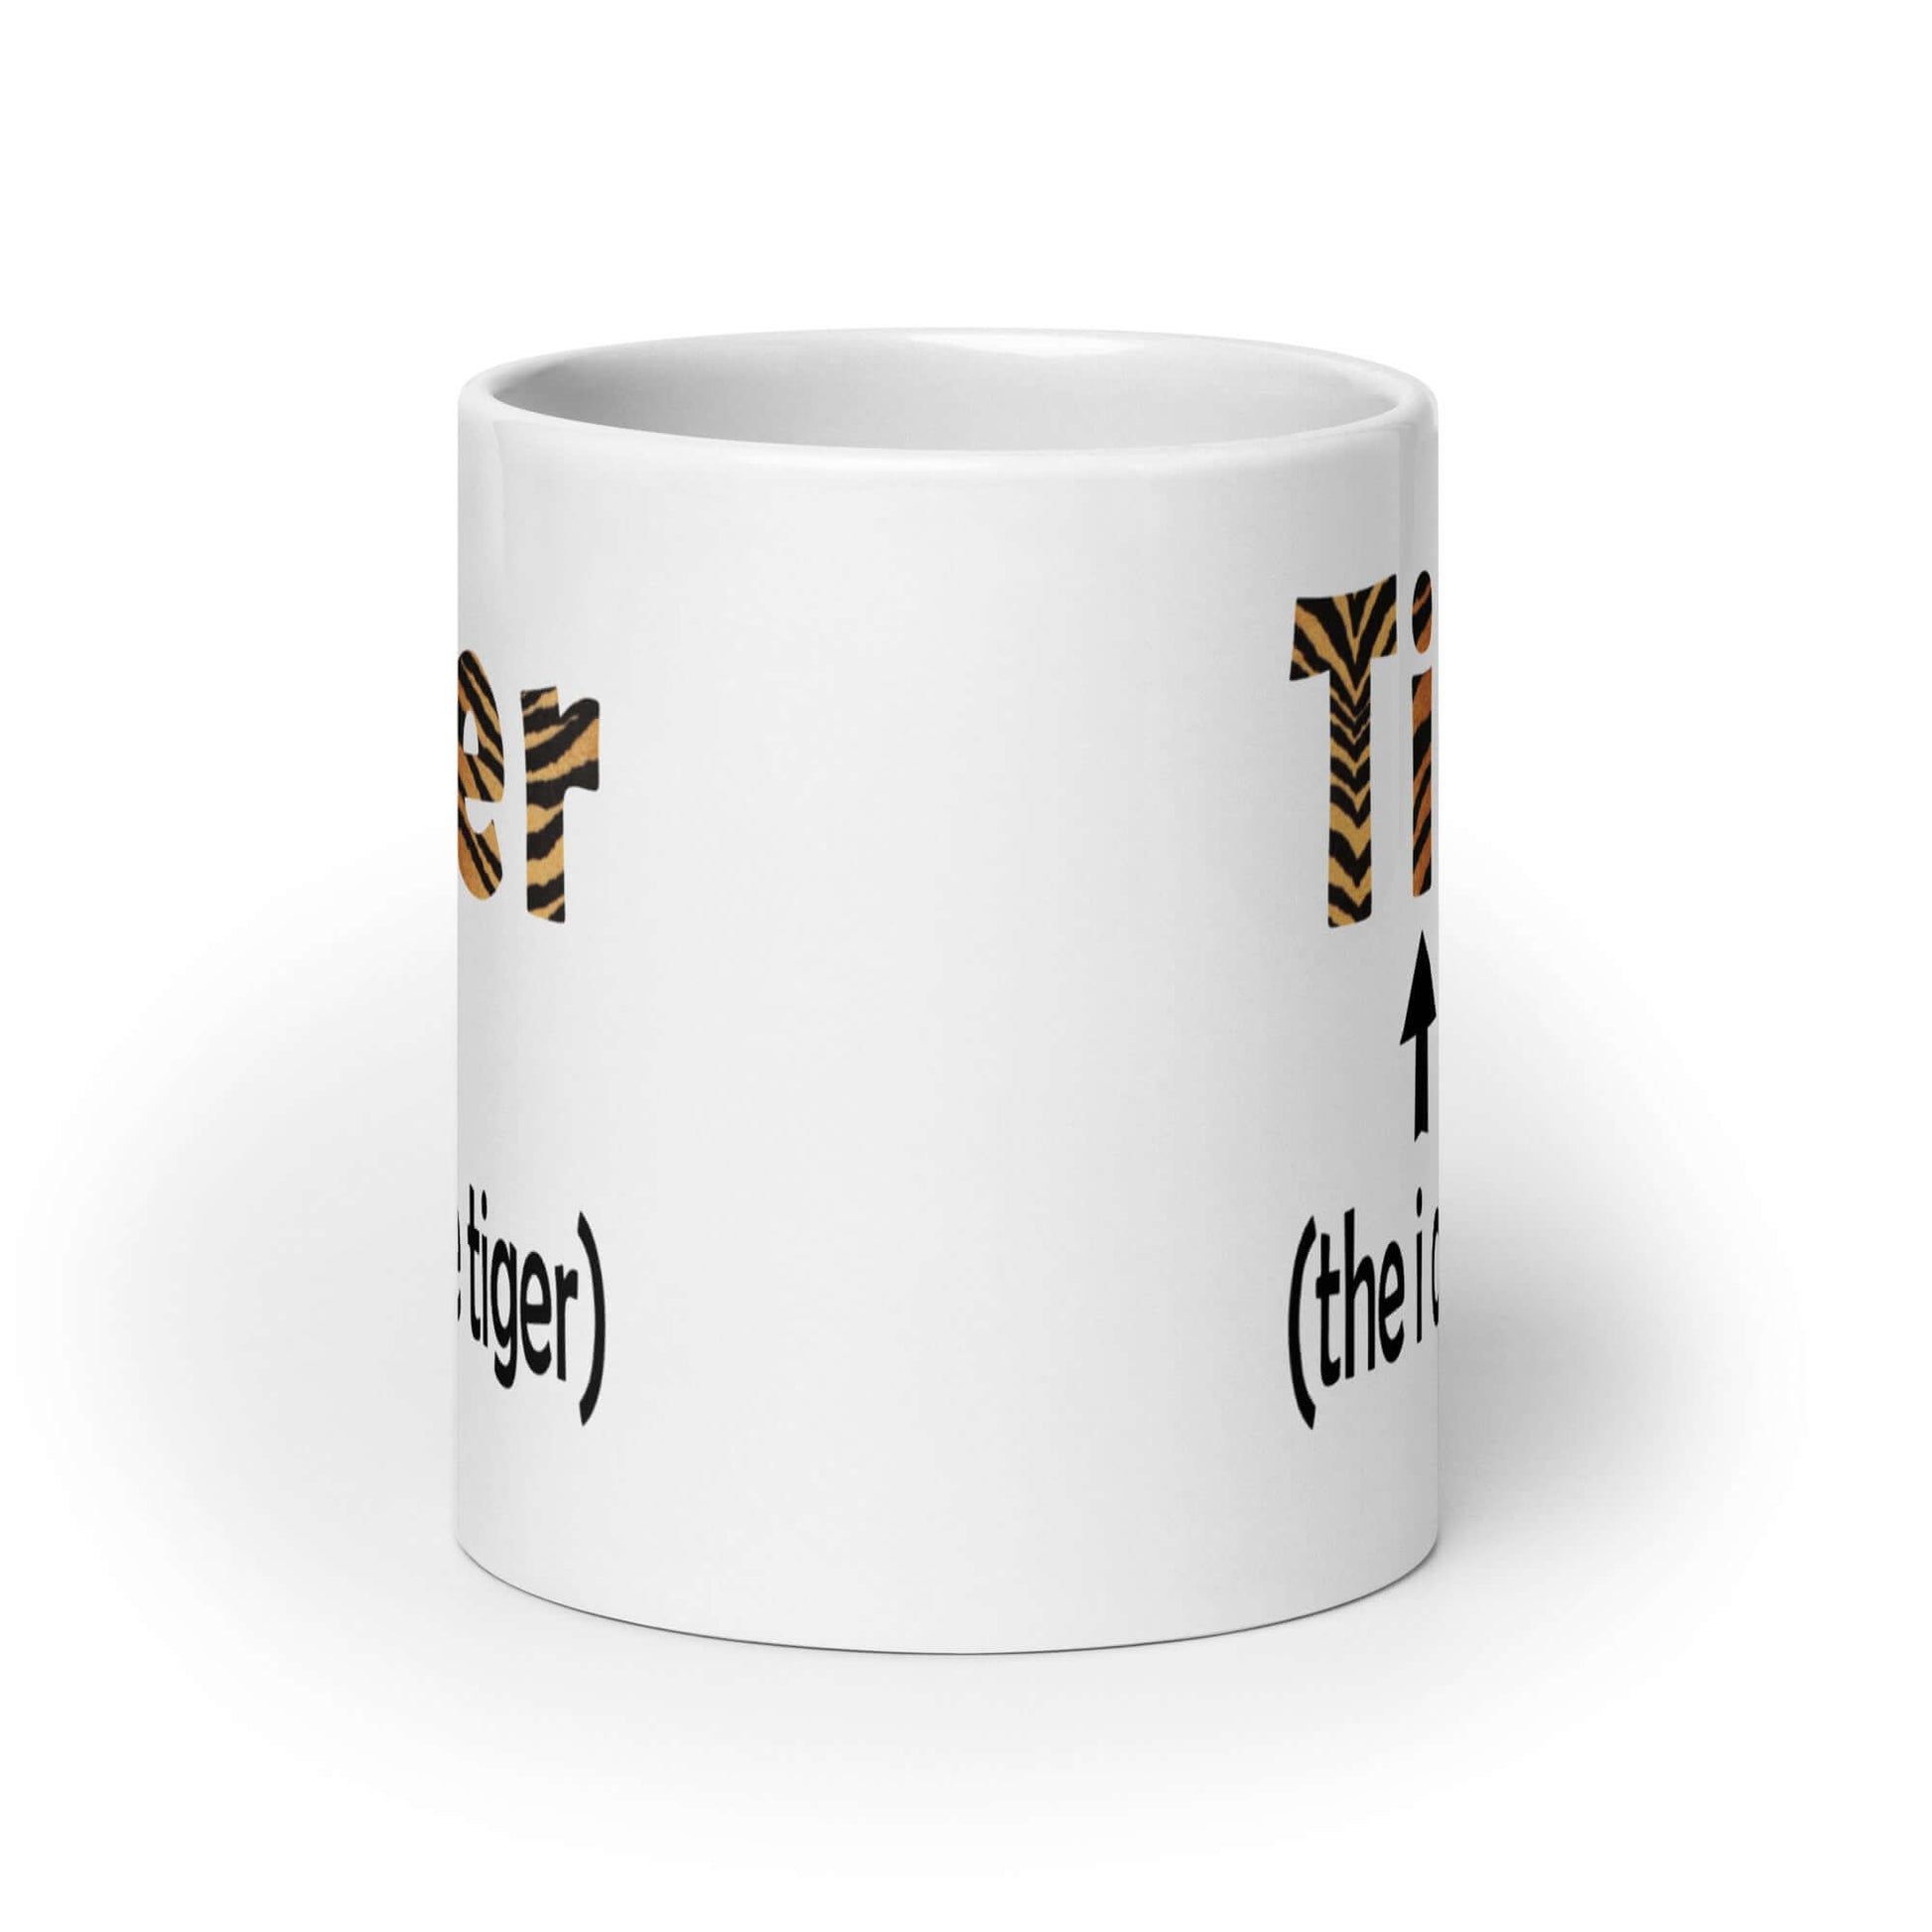 White ceramic coffee mug with the word Tiger printed in a tiger stripe font. In smaller letters beneath tiger it says the I of the tiger with an arrow pointing to the letting I in the words tiger. The graphics are printed on both sides of the mug.